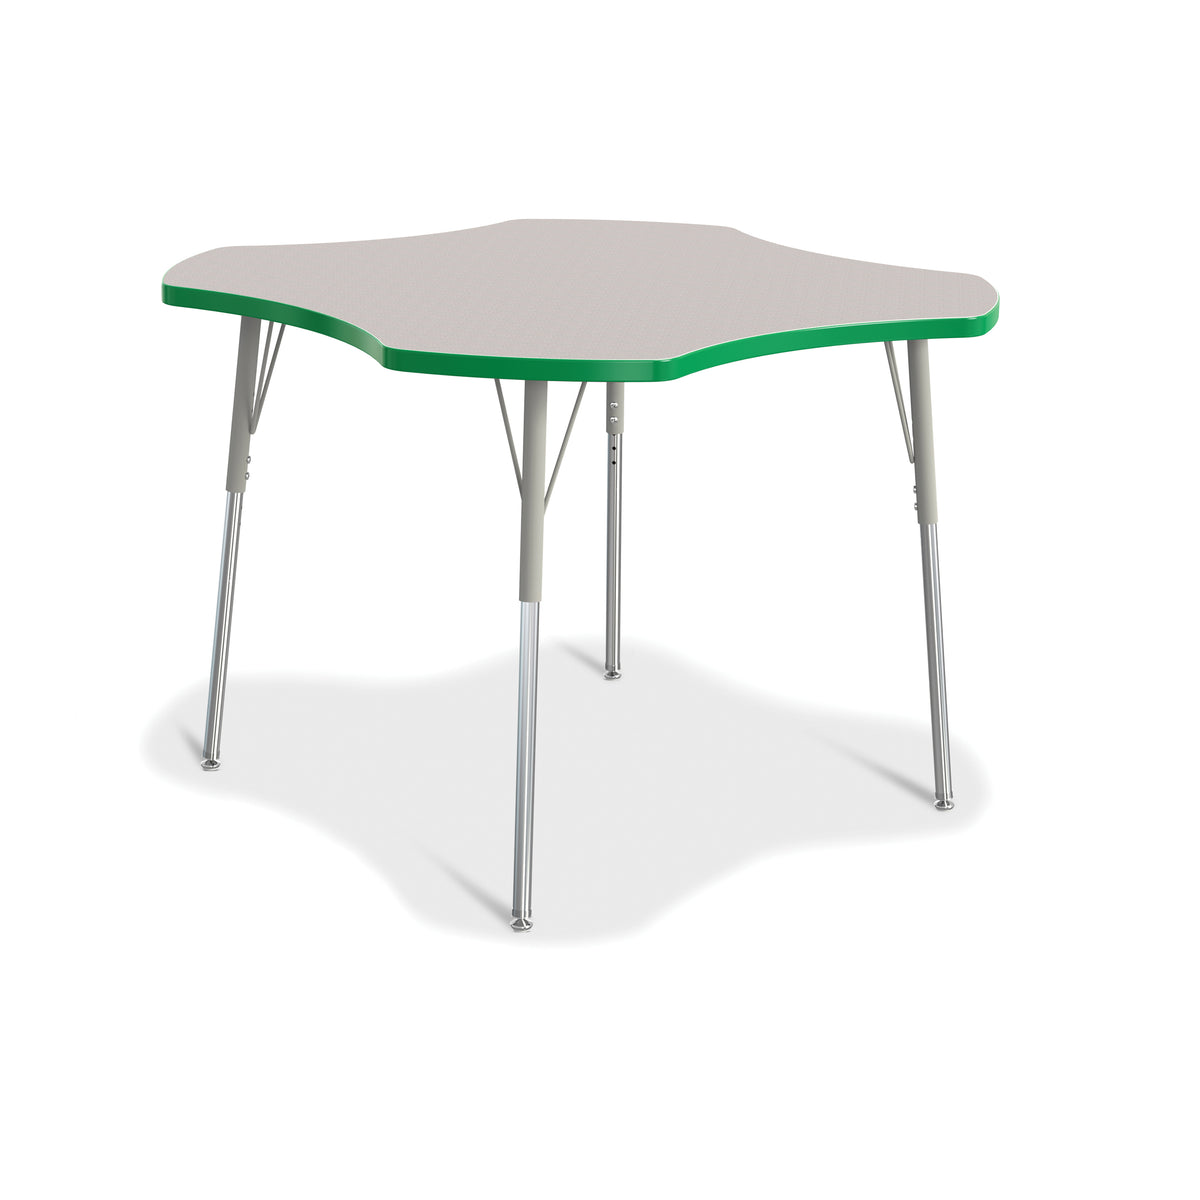 6453JCA119, Berries Four Leaf Activity Table, A-height - Freckled Gray/Green/Gray